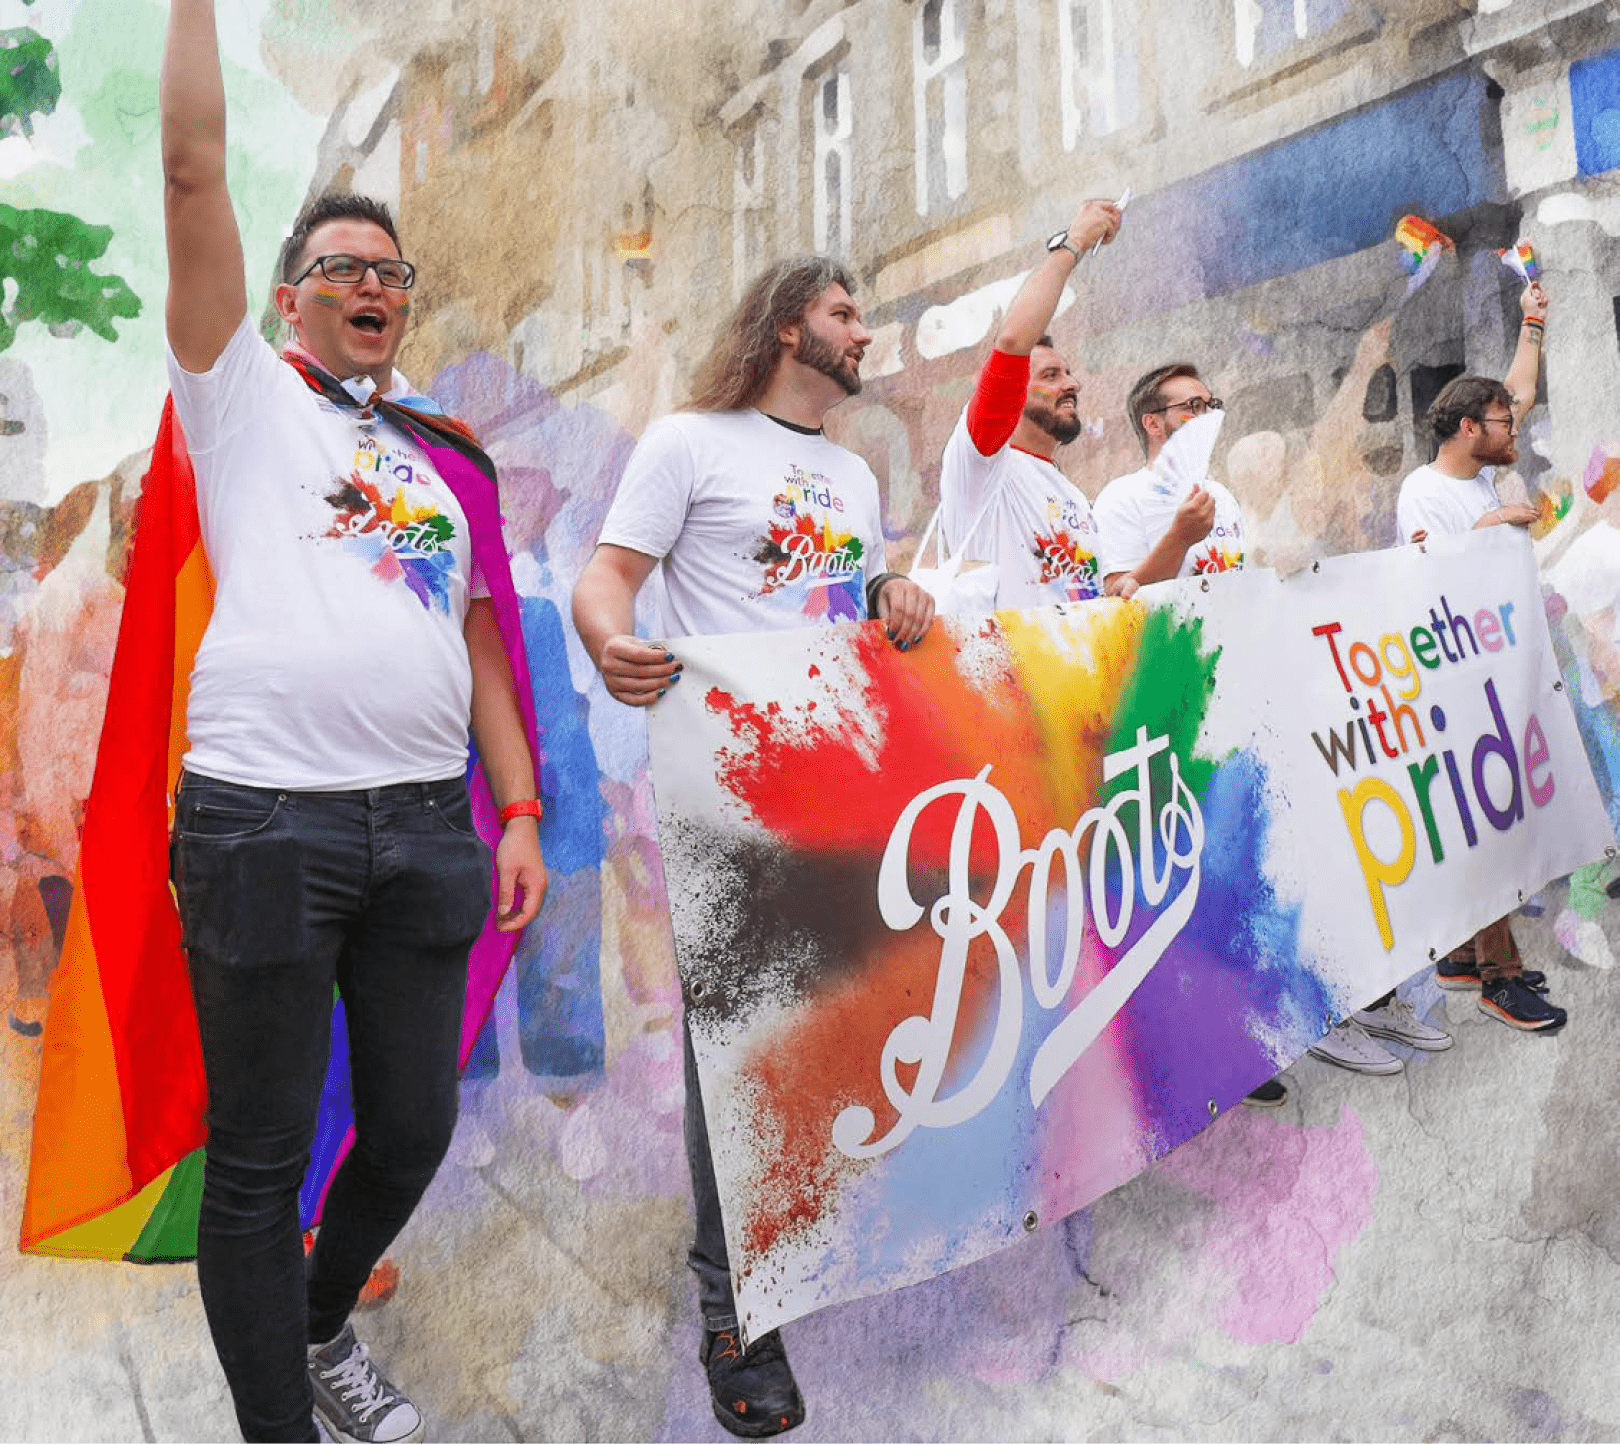 Members of the UK chapter of the Pride Alliance BRG attend pride parade